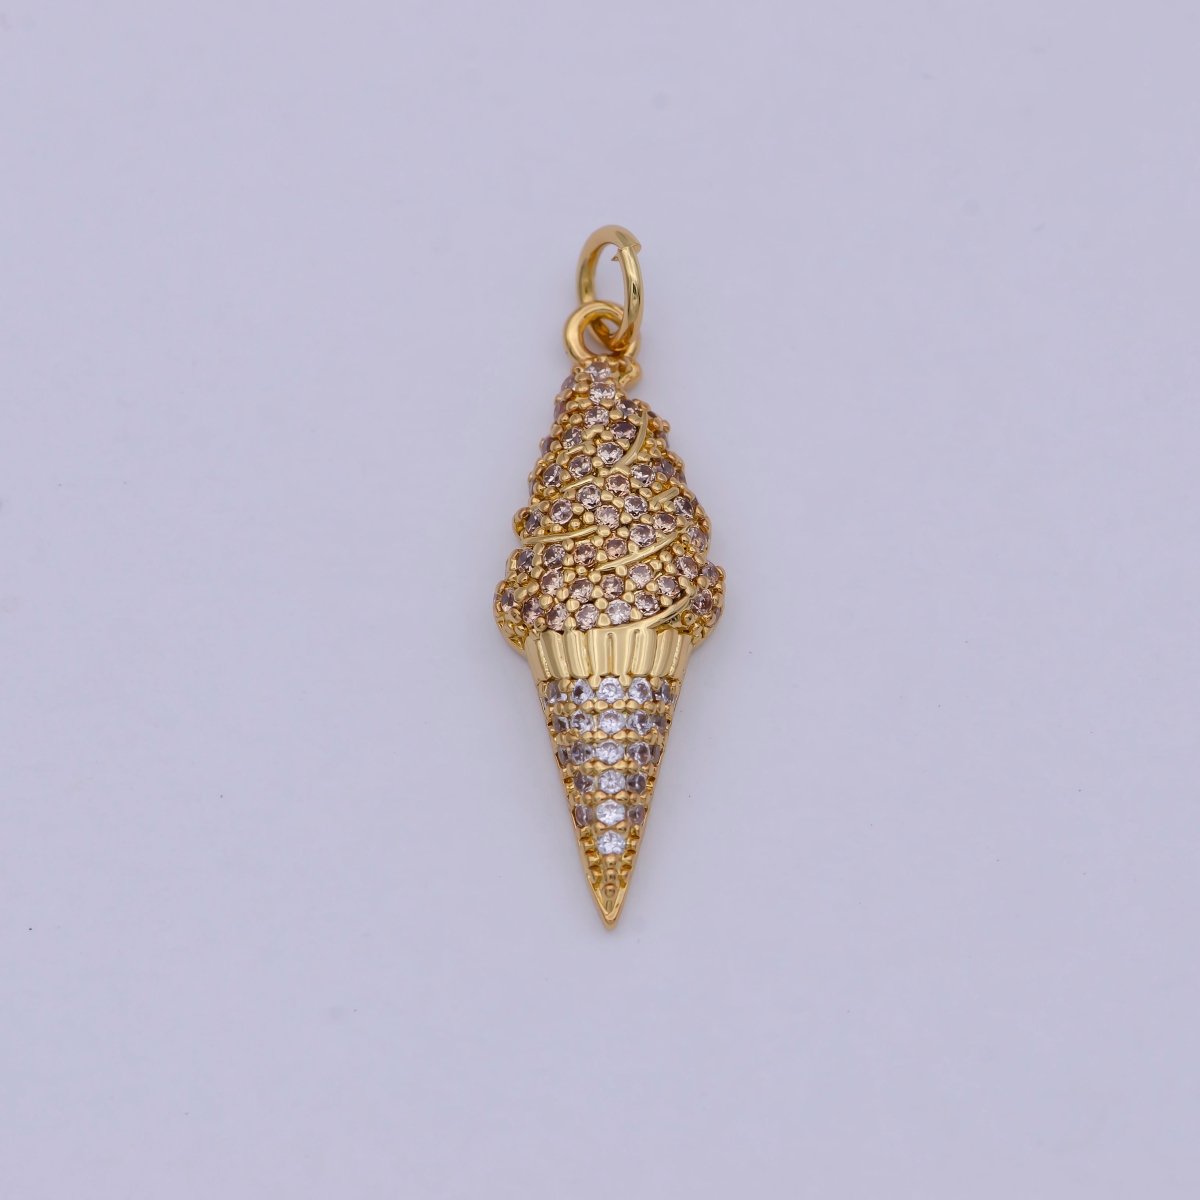 Dainty Tiny 24k Gold Filled Ice Cream Cone Charm micro Pave Charm Necklace Pendant Earring Bracelet Foodies McD Dessert Junk Food Charm, C-831 - DLUXCA